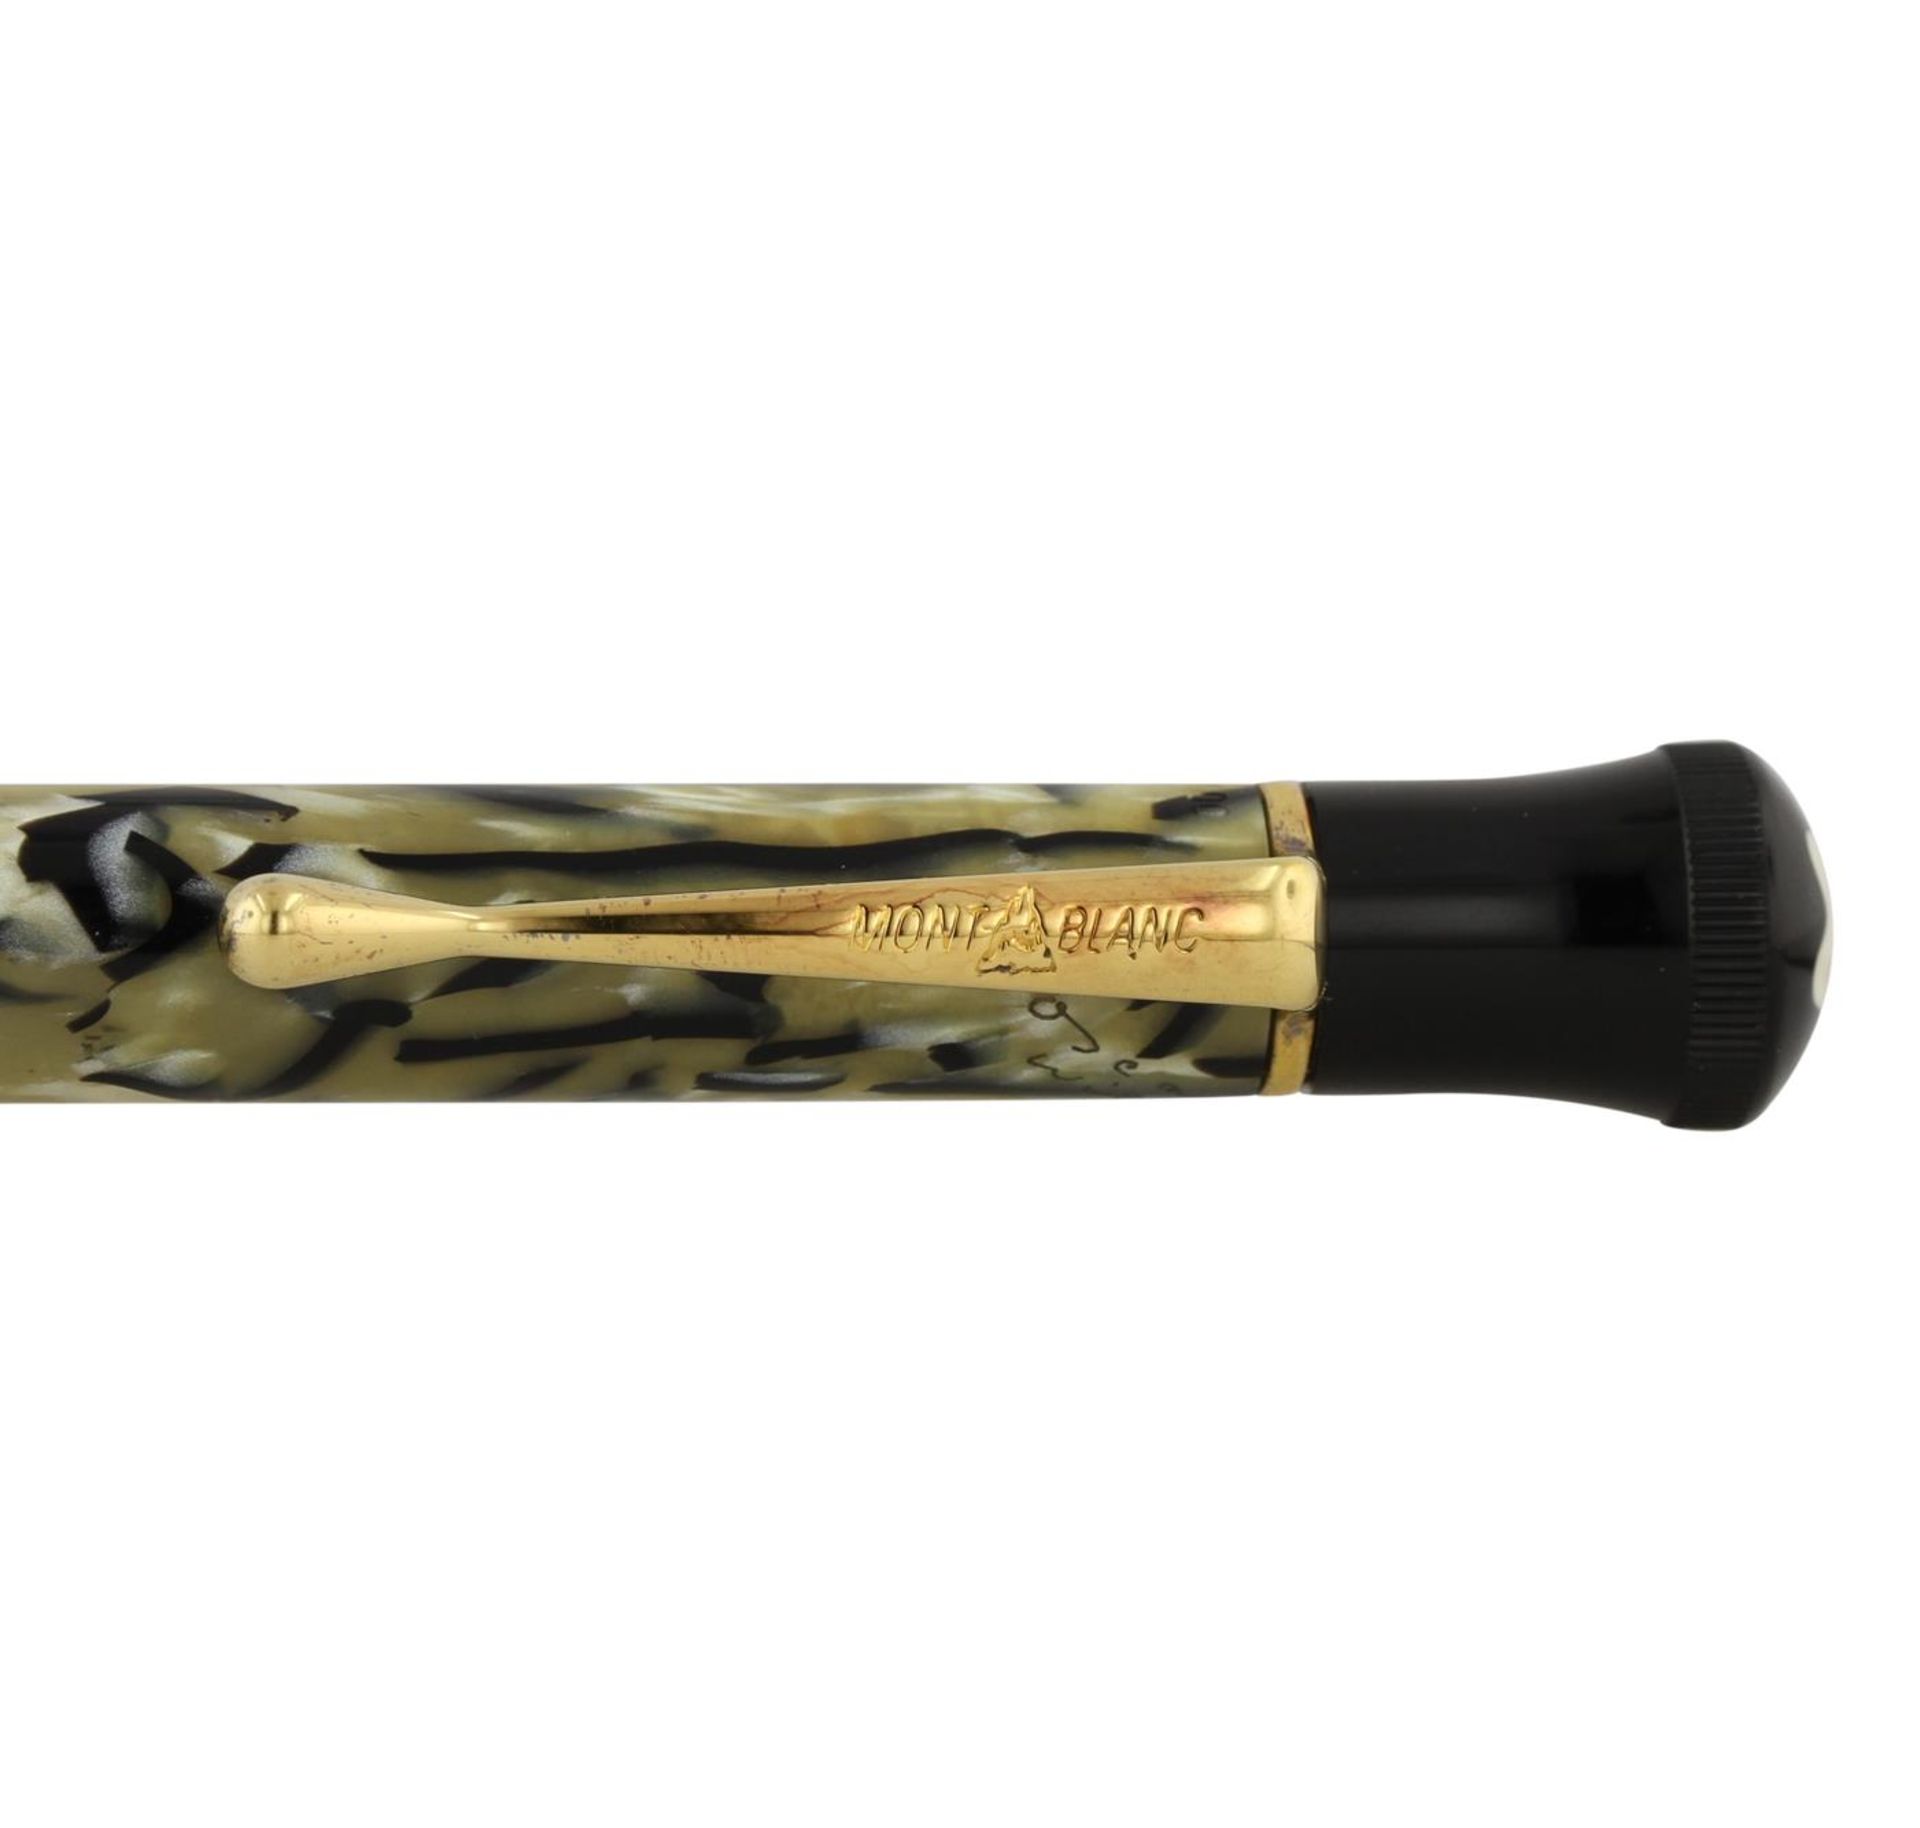 Montblanc Limited Edition Oscar Wilde Pencil - Image 2 of 2